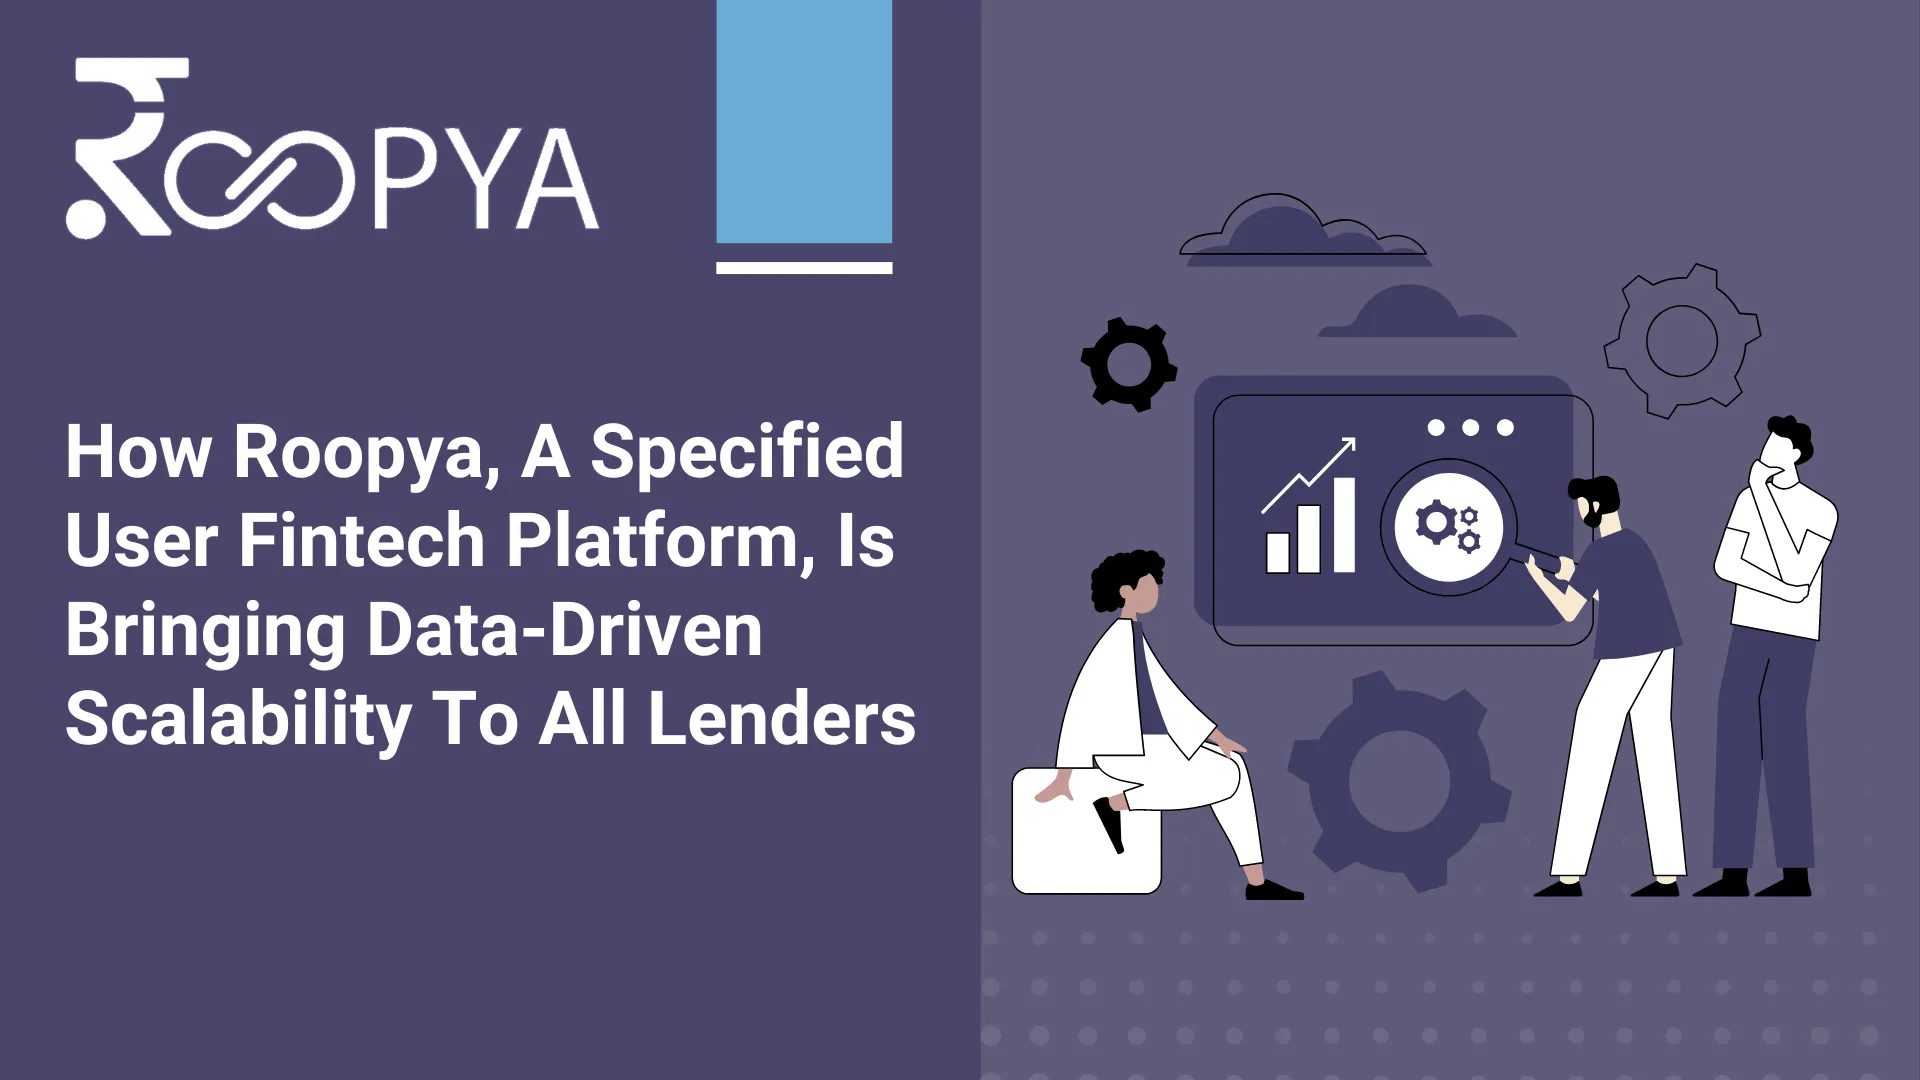 How Roopya, A Specified User Fintech Platform, Is Bringing Data-Driven Scalability To All Lenders